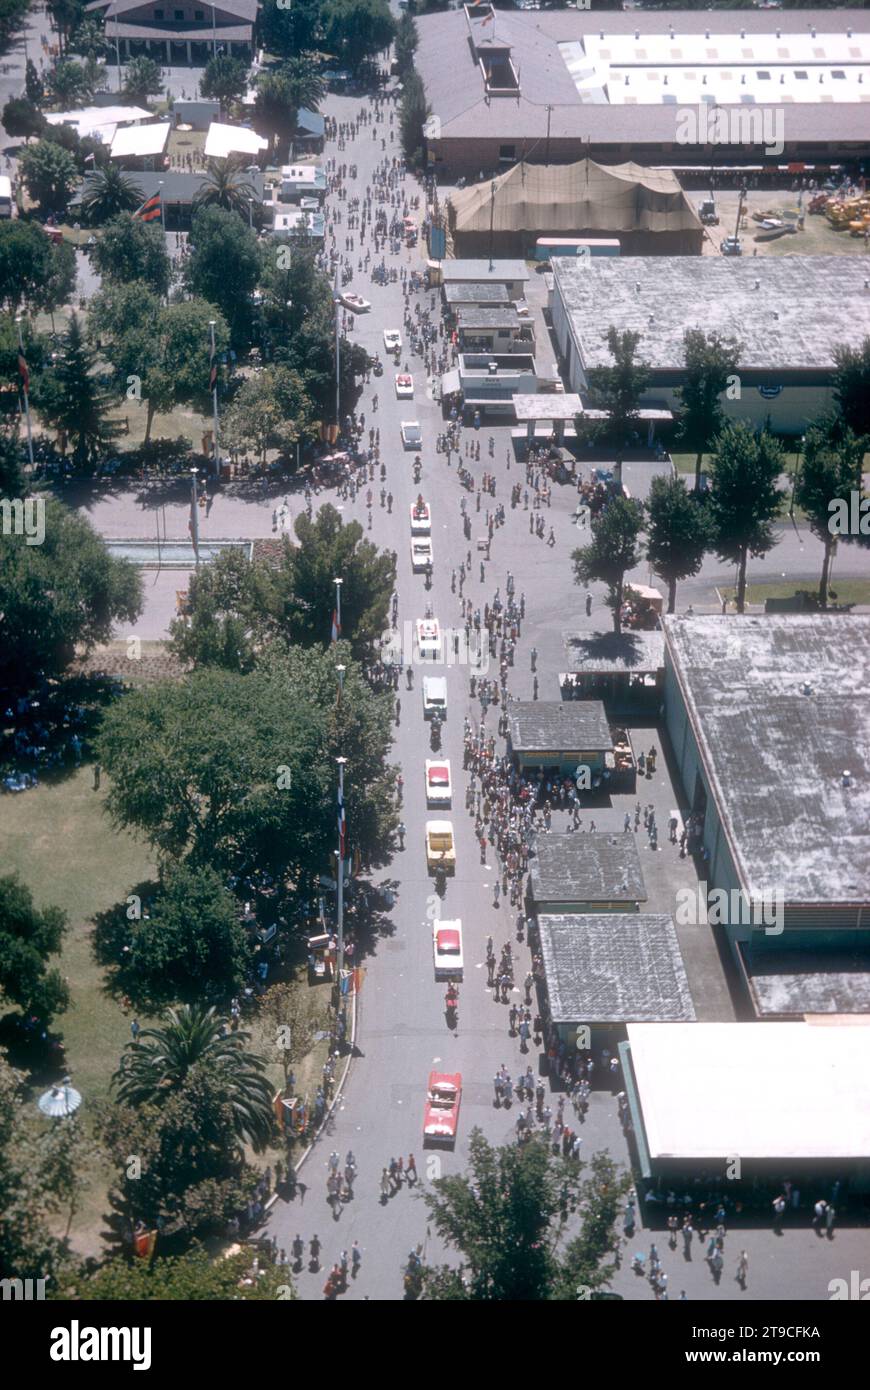 SACRAMENTO, CA - AUGUST, 1958: An aerial view of the Sacramento State Fairgrounds as a parade of cars rolls down street circa August, 1958 in Sacramento, California. (Photo by Hy Peskin/Getty Images) (Set Number: X5347) Stock Photo